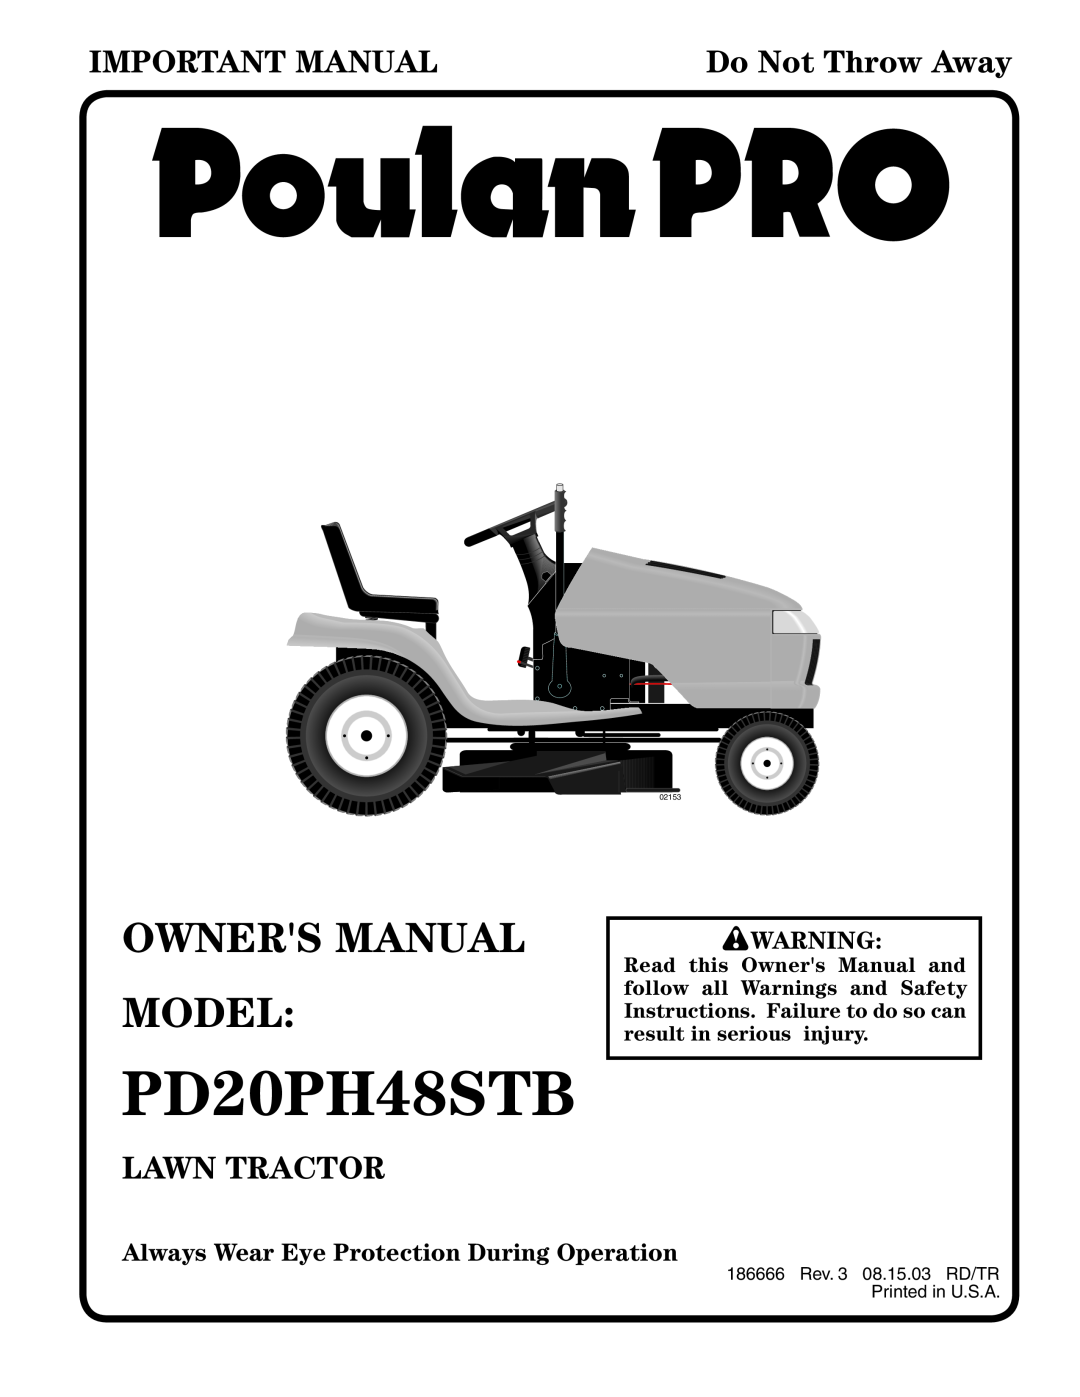 Poulan PD20PH48STB owner manual Always Wear Eye Protection During Operation, Important Manual, Lawn Tractor, 02153 